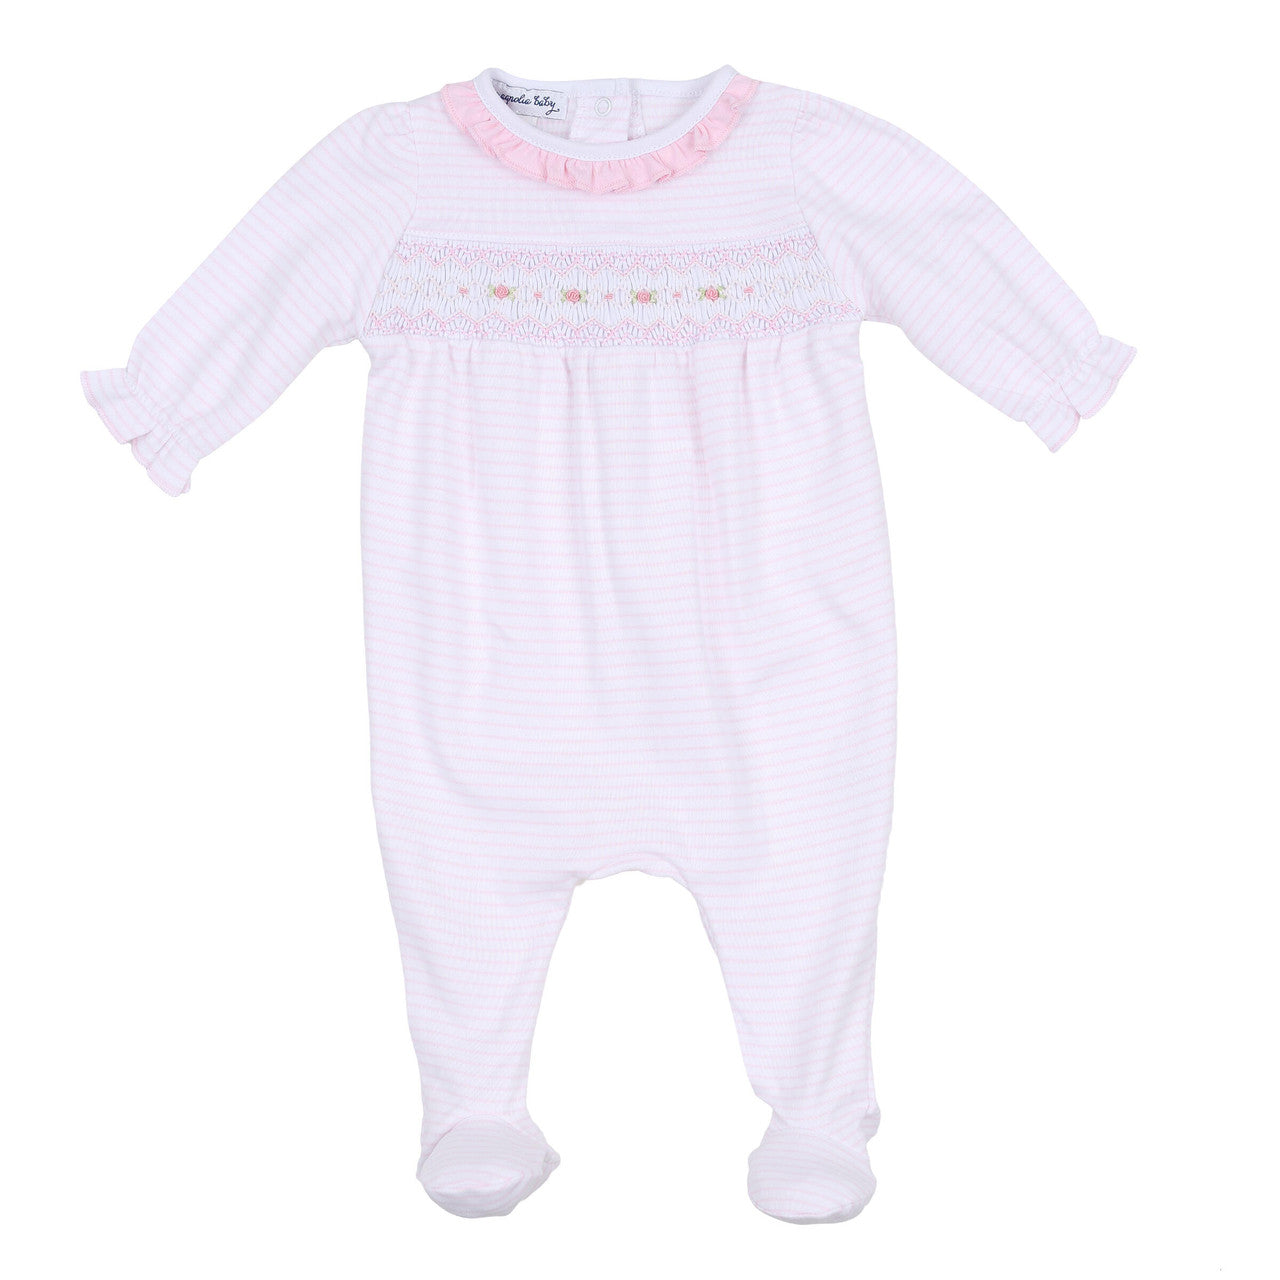 Katie and Kyle Pink Smocked Ruffle Footie